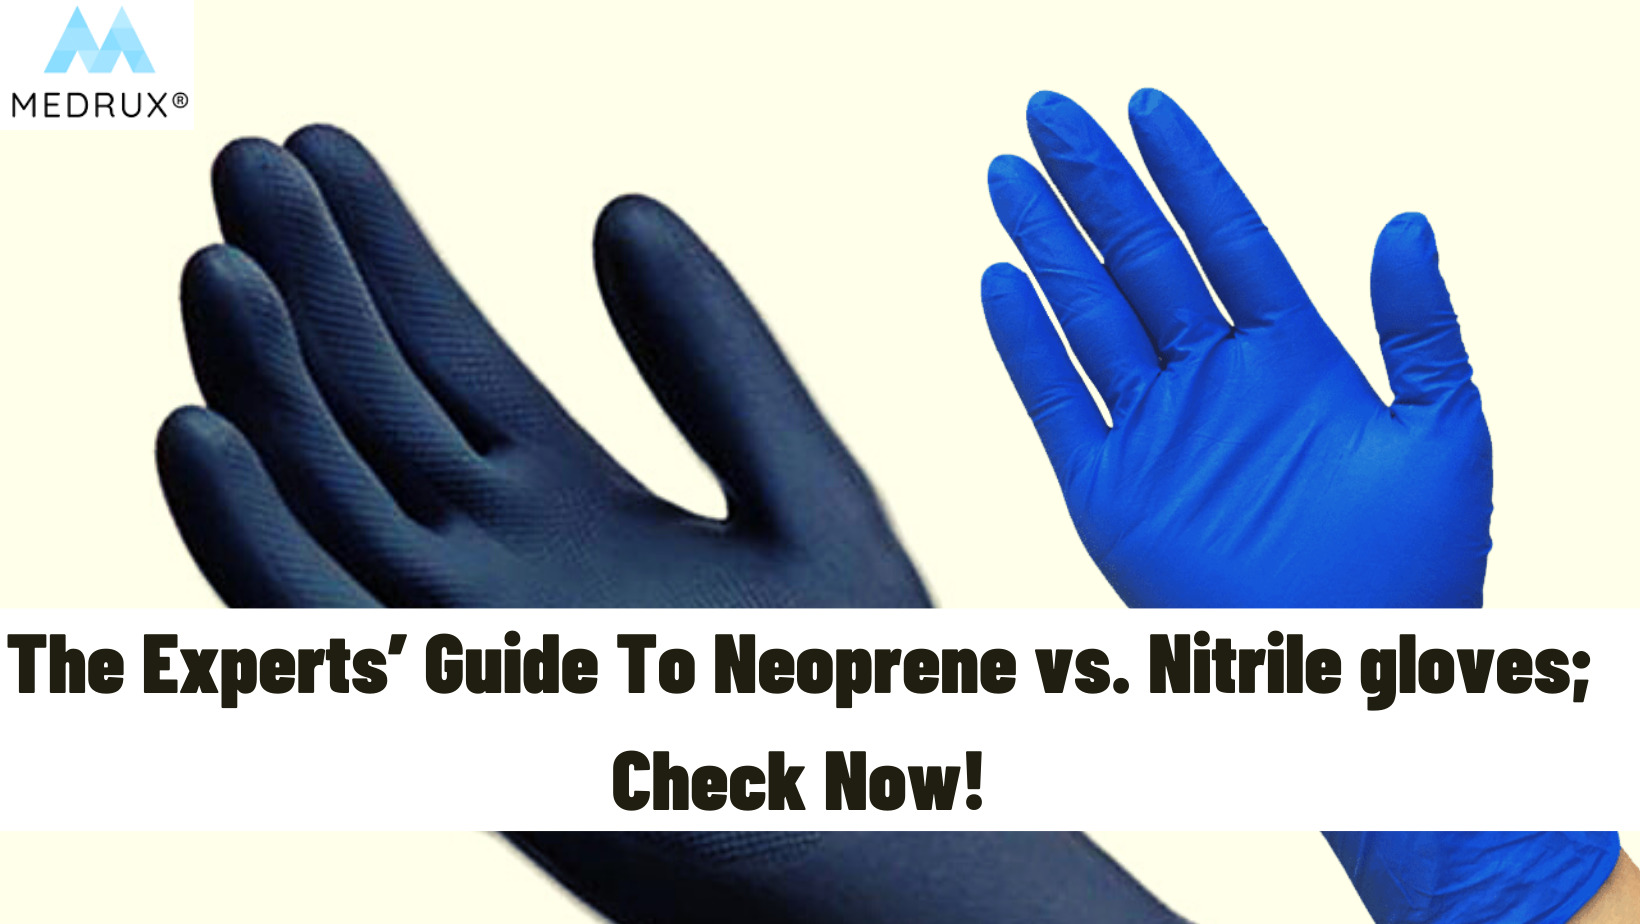 What is the Difference Between Neoprene and Nitrile?